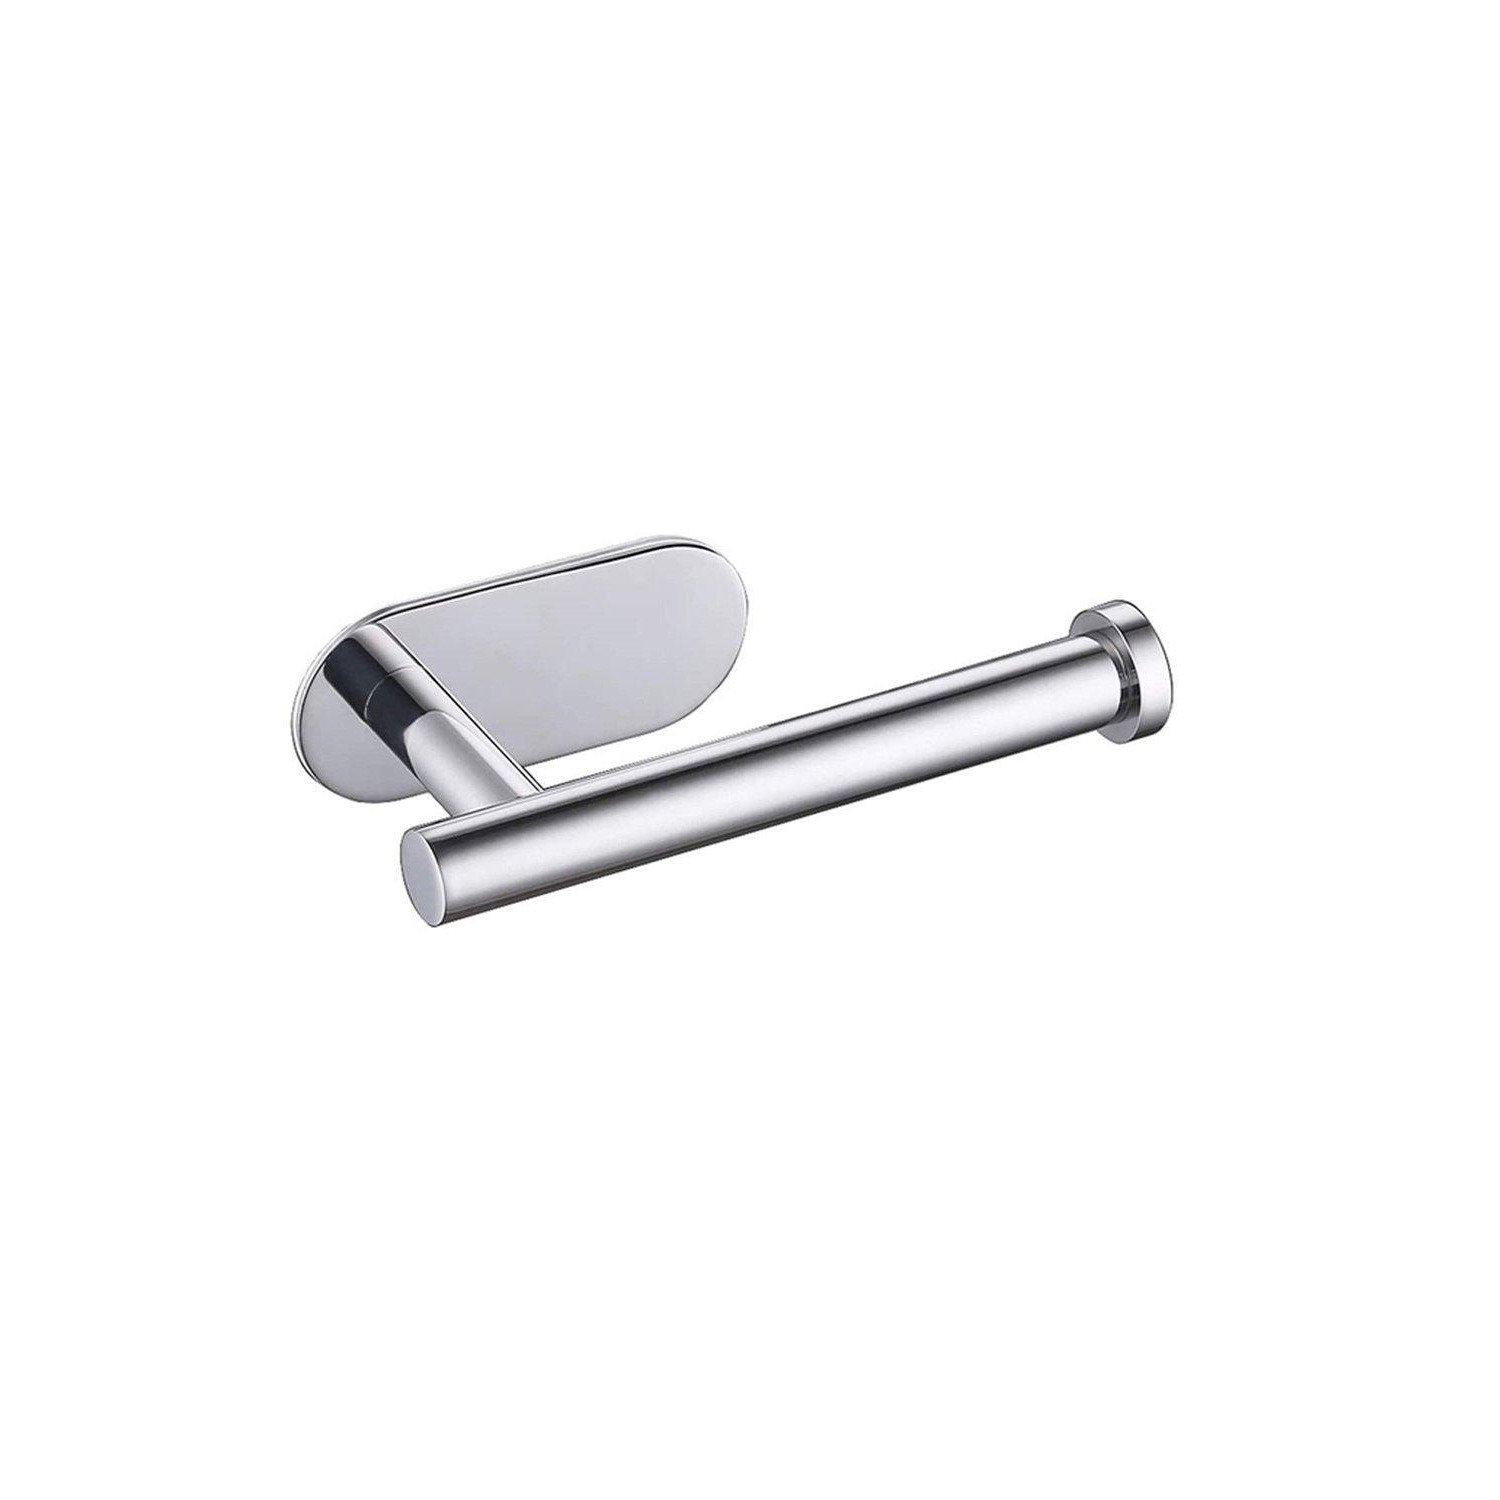 Modern Wall Mounted Stainless Steel Toilet Paper Roll Holder for Bathroom - image 1